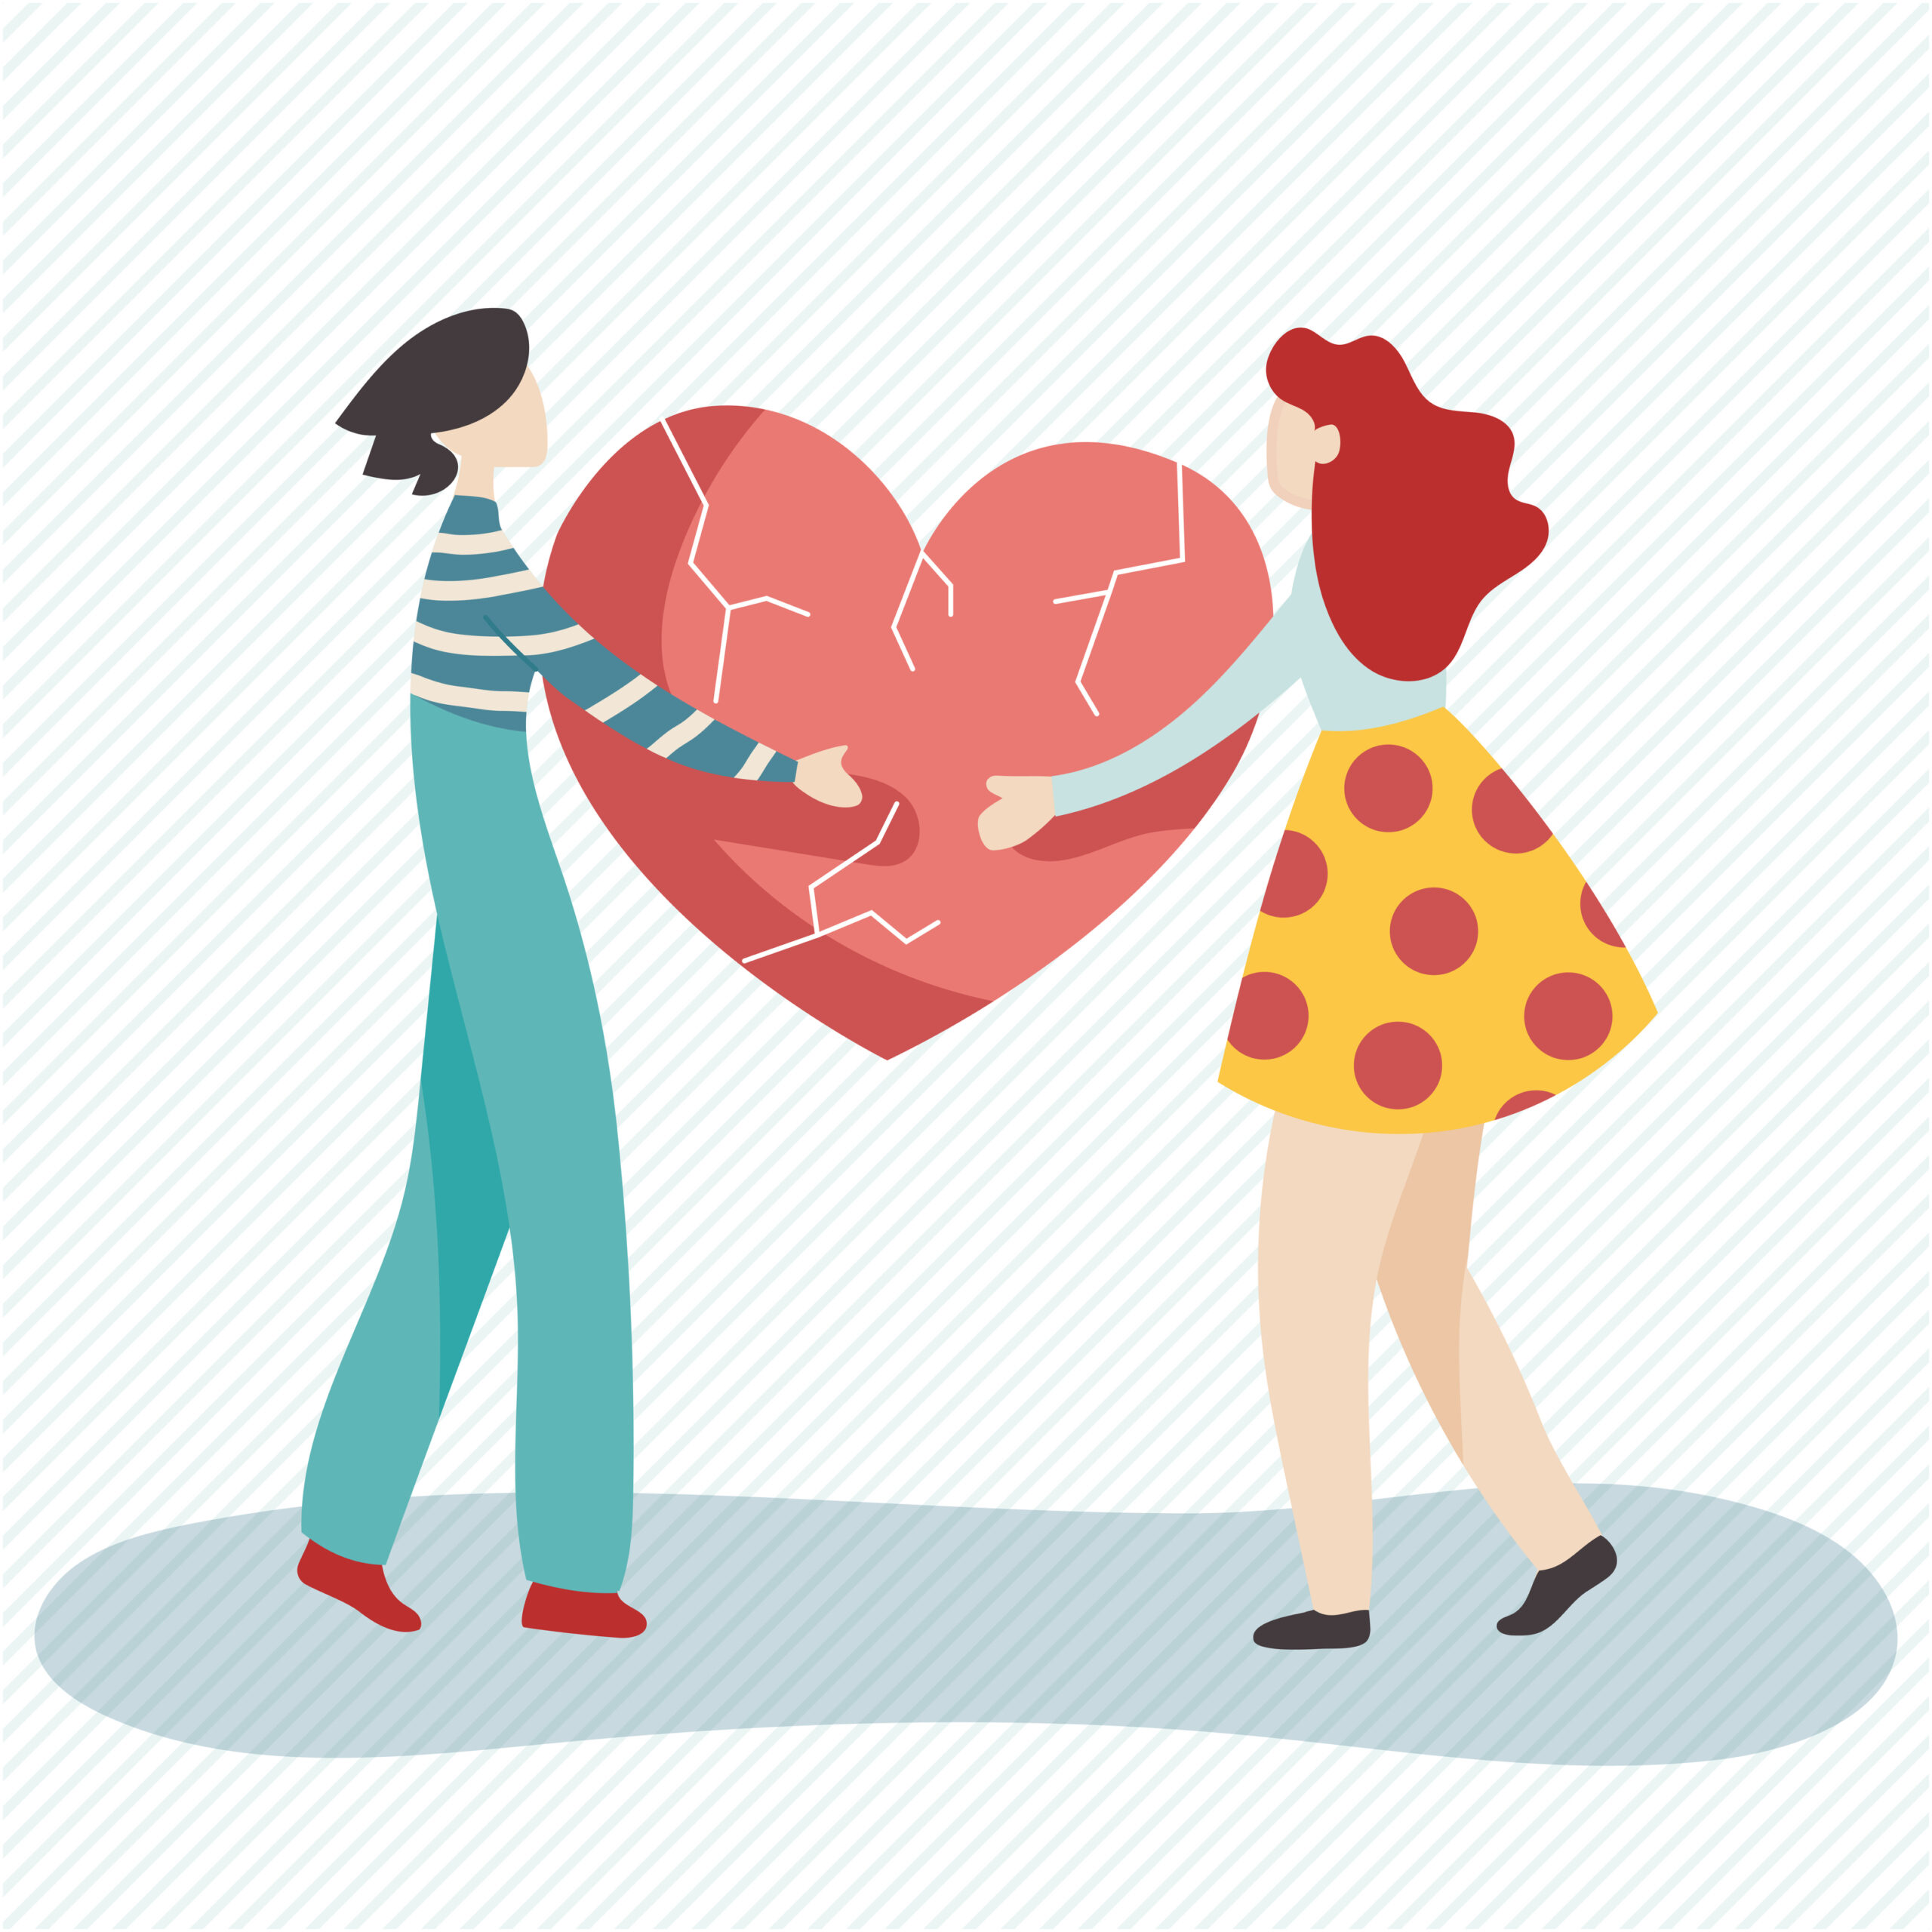 Man & woman holding a red heart, representing sharing feelings of love. Marriage counseling in American Fork, UT can be beneficial for you and your family. Learn more from our couples therapists today!